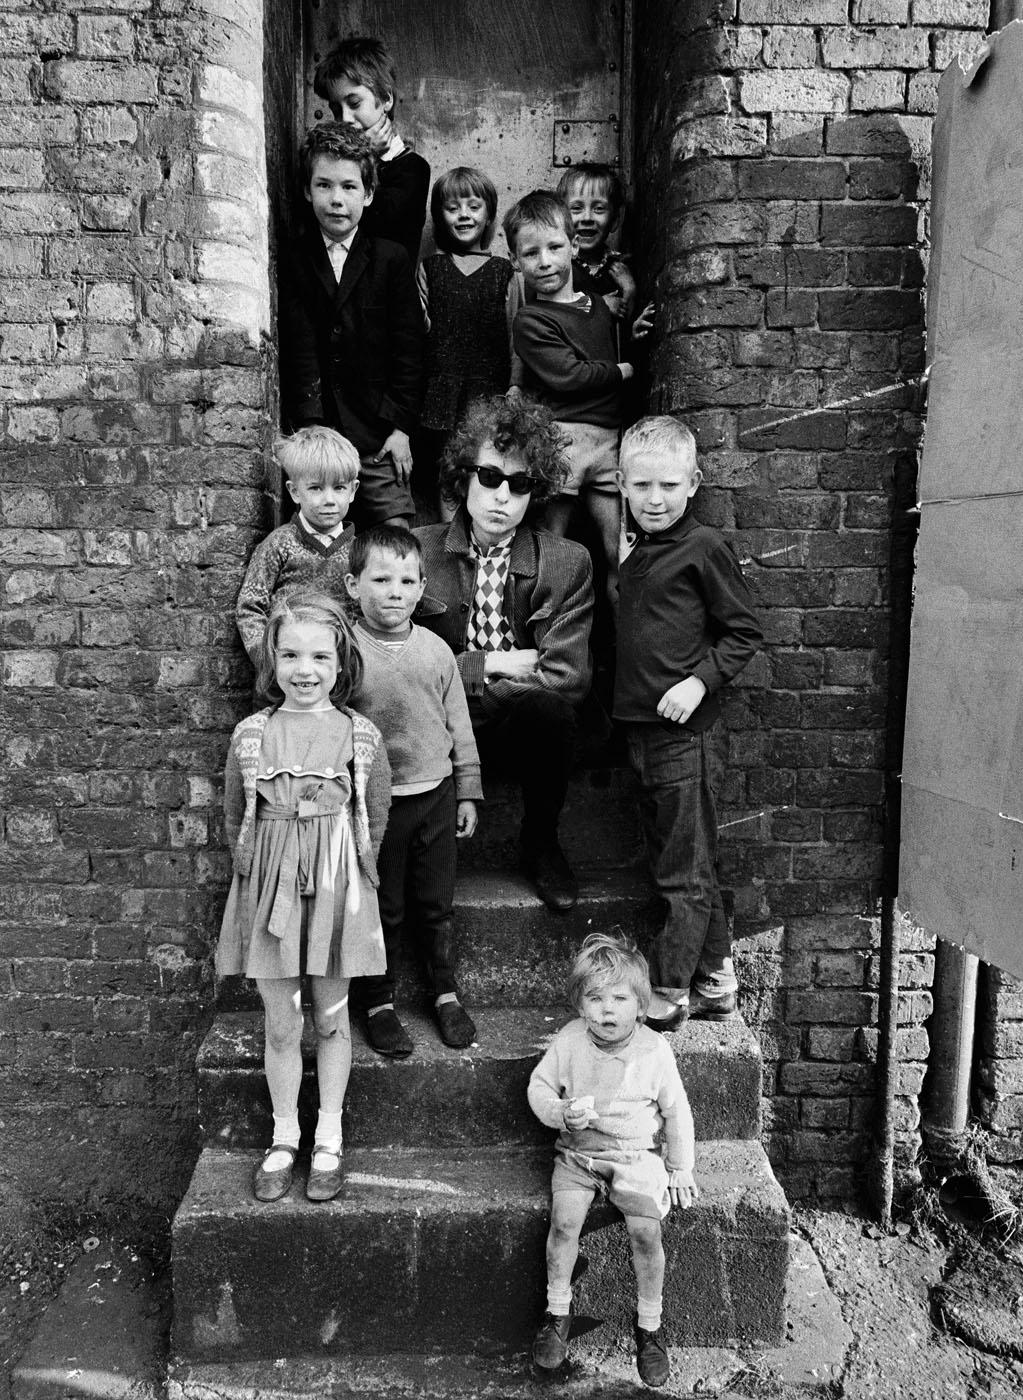 Barry Feinstein Black and White Photograph - Bob Dylan, "Kids On Steps" Liverpool, England 1966, framed 20x24" print